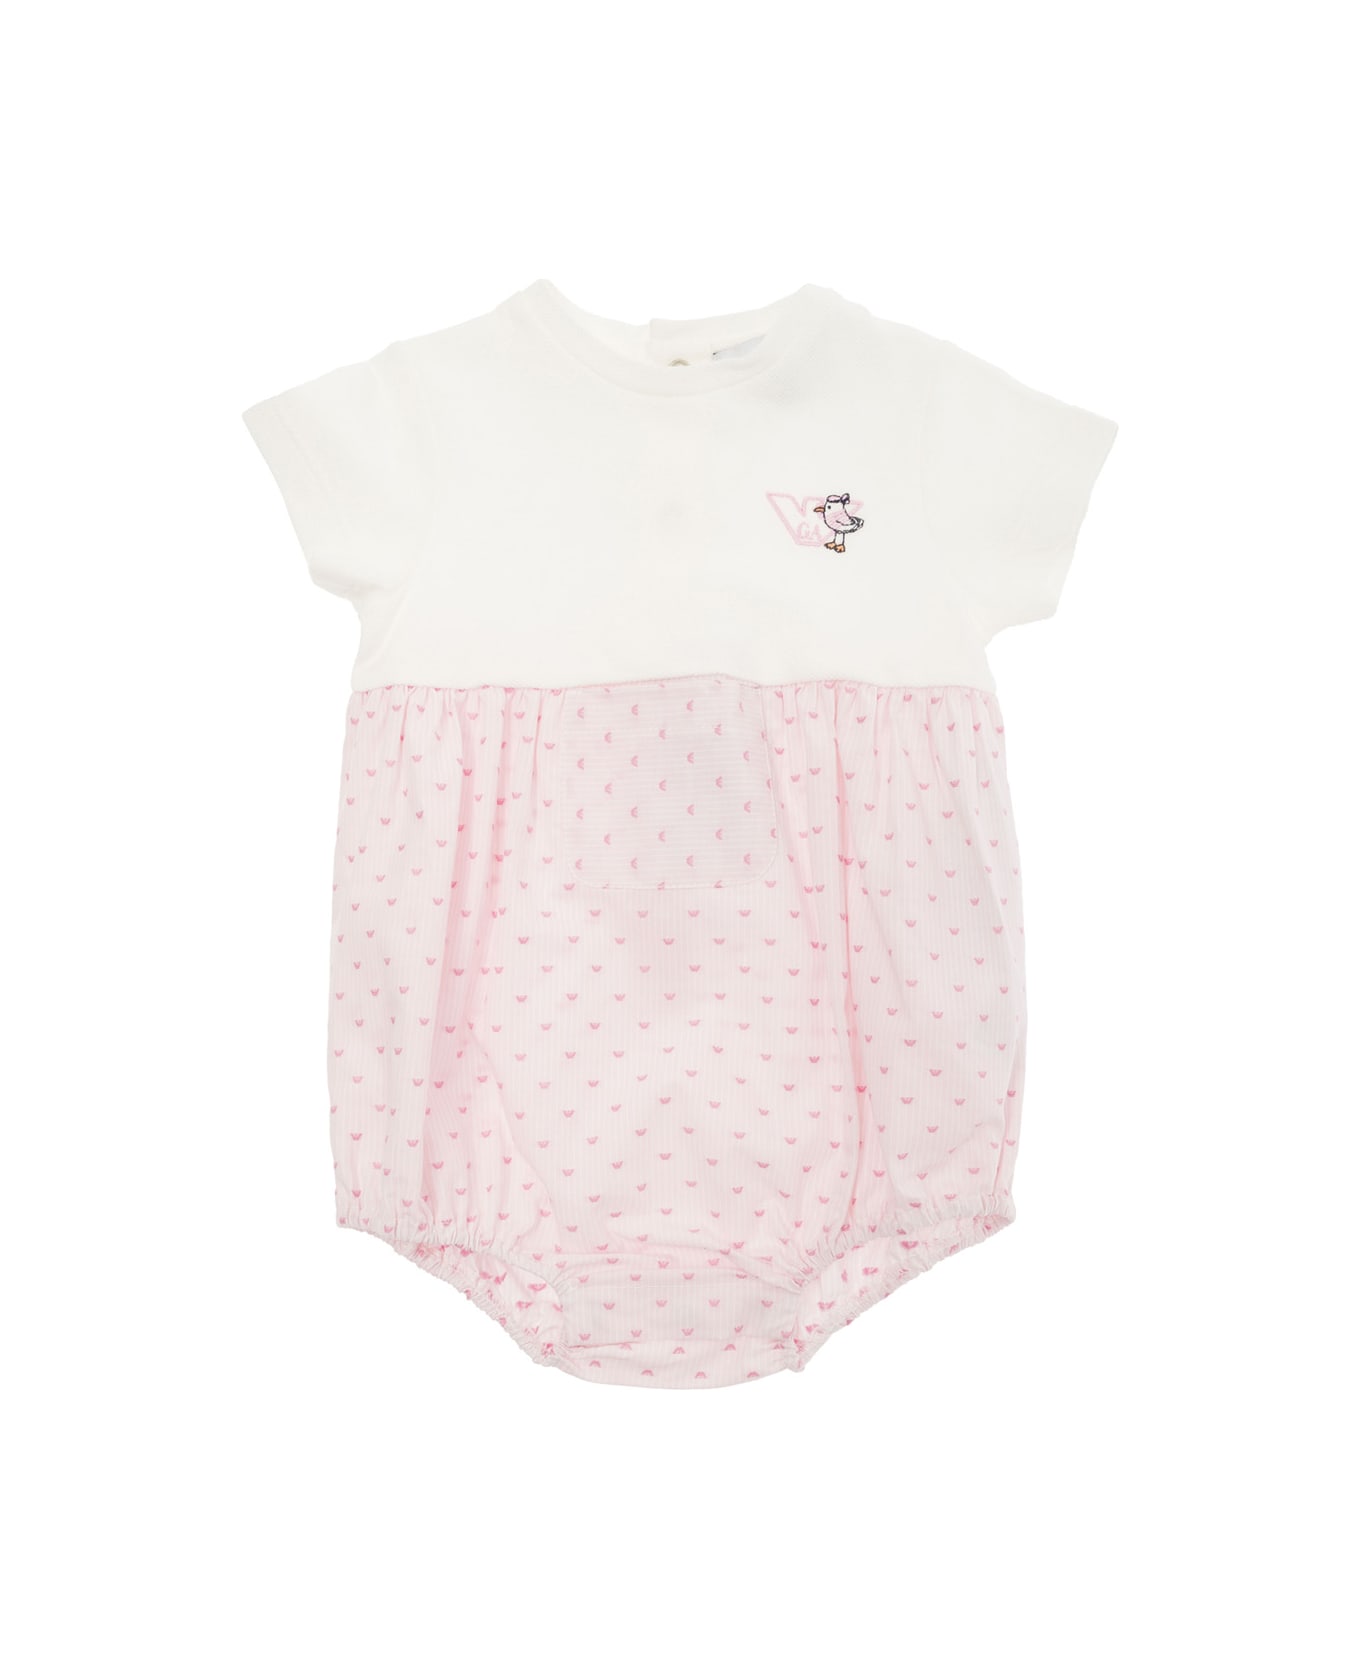 Emporio Armani Pink And White Romper With Logo Print In Cotton Baby - Pink